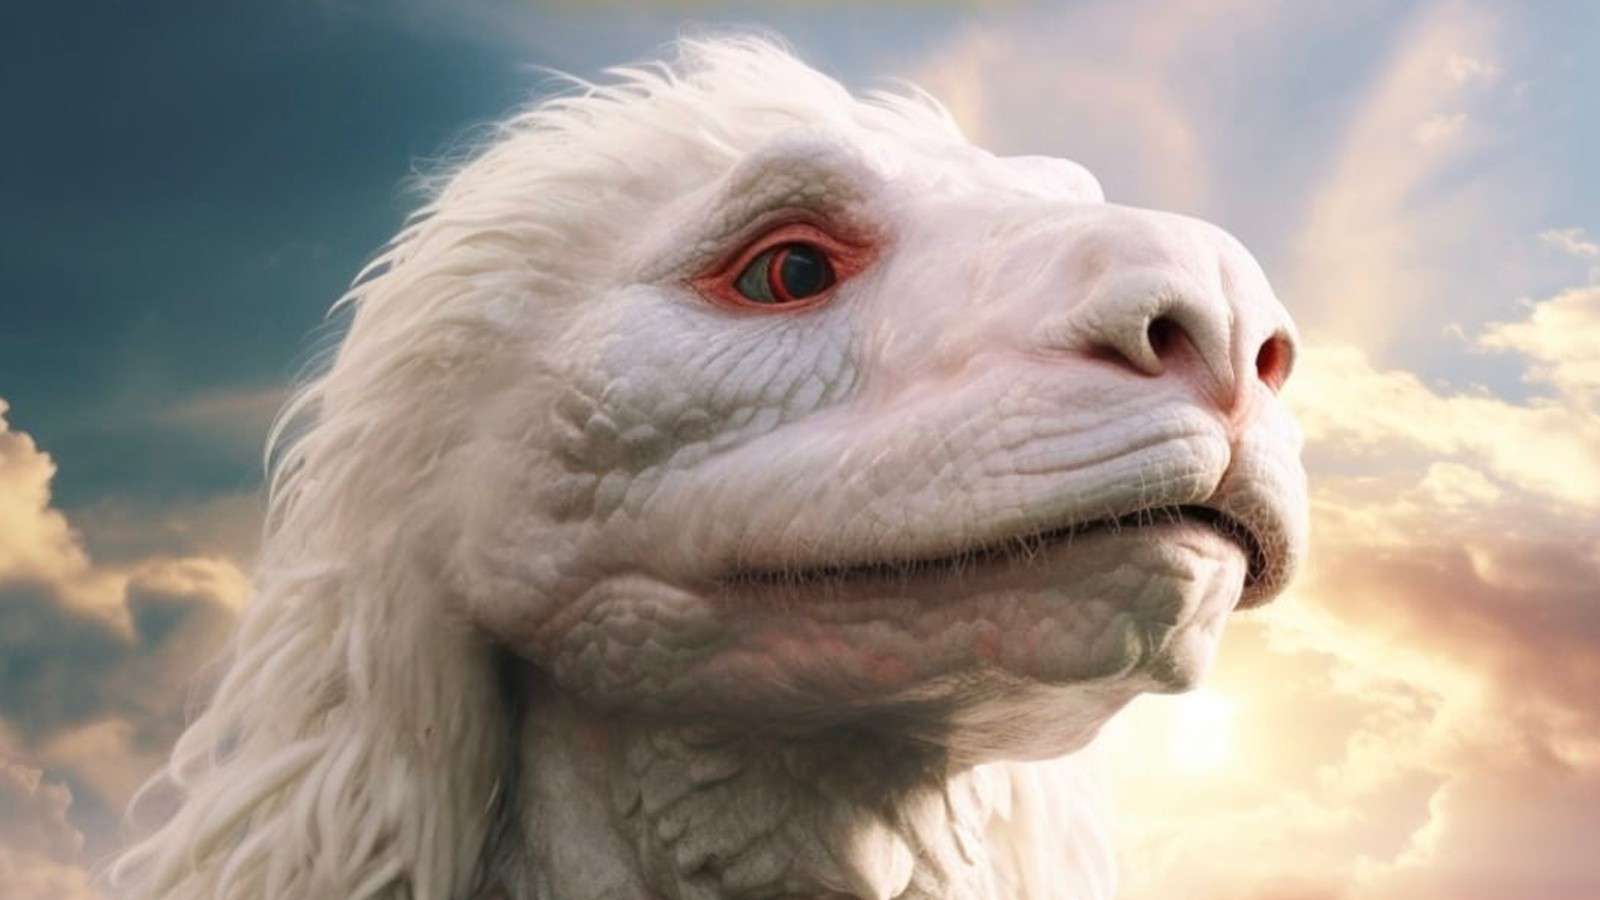 Falkor on the fake poster for The NeverEnding sequel